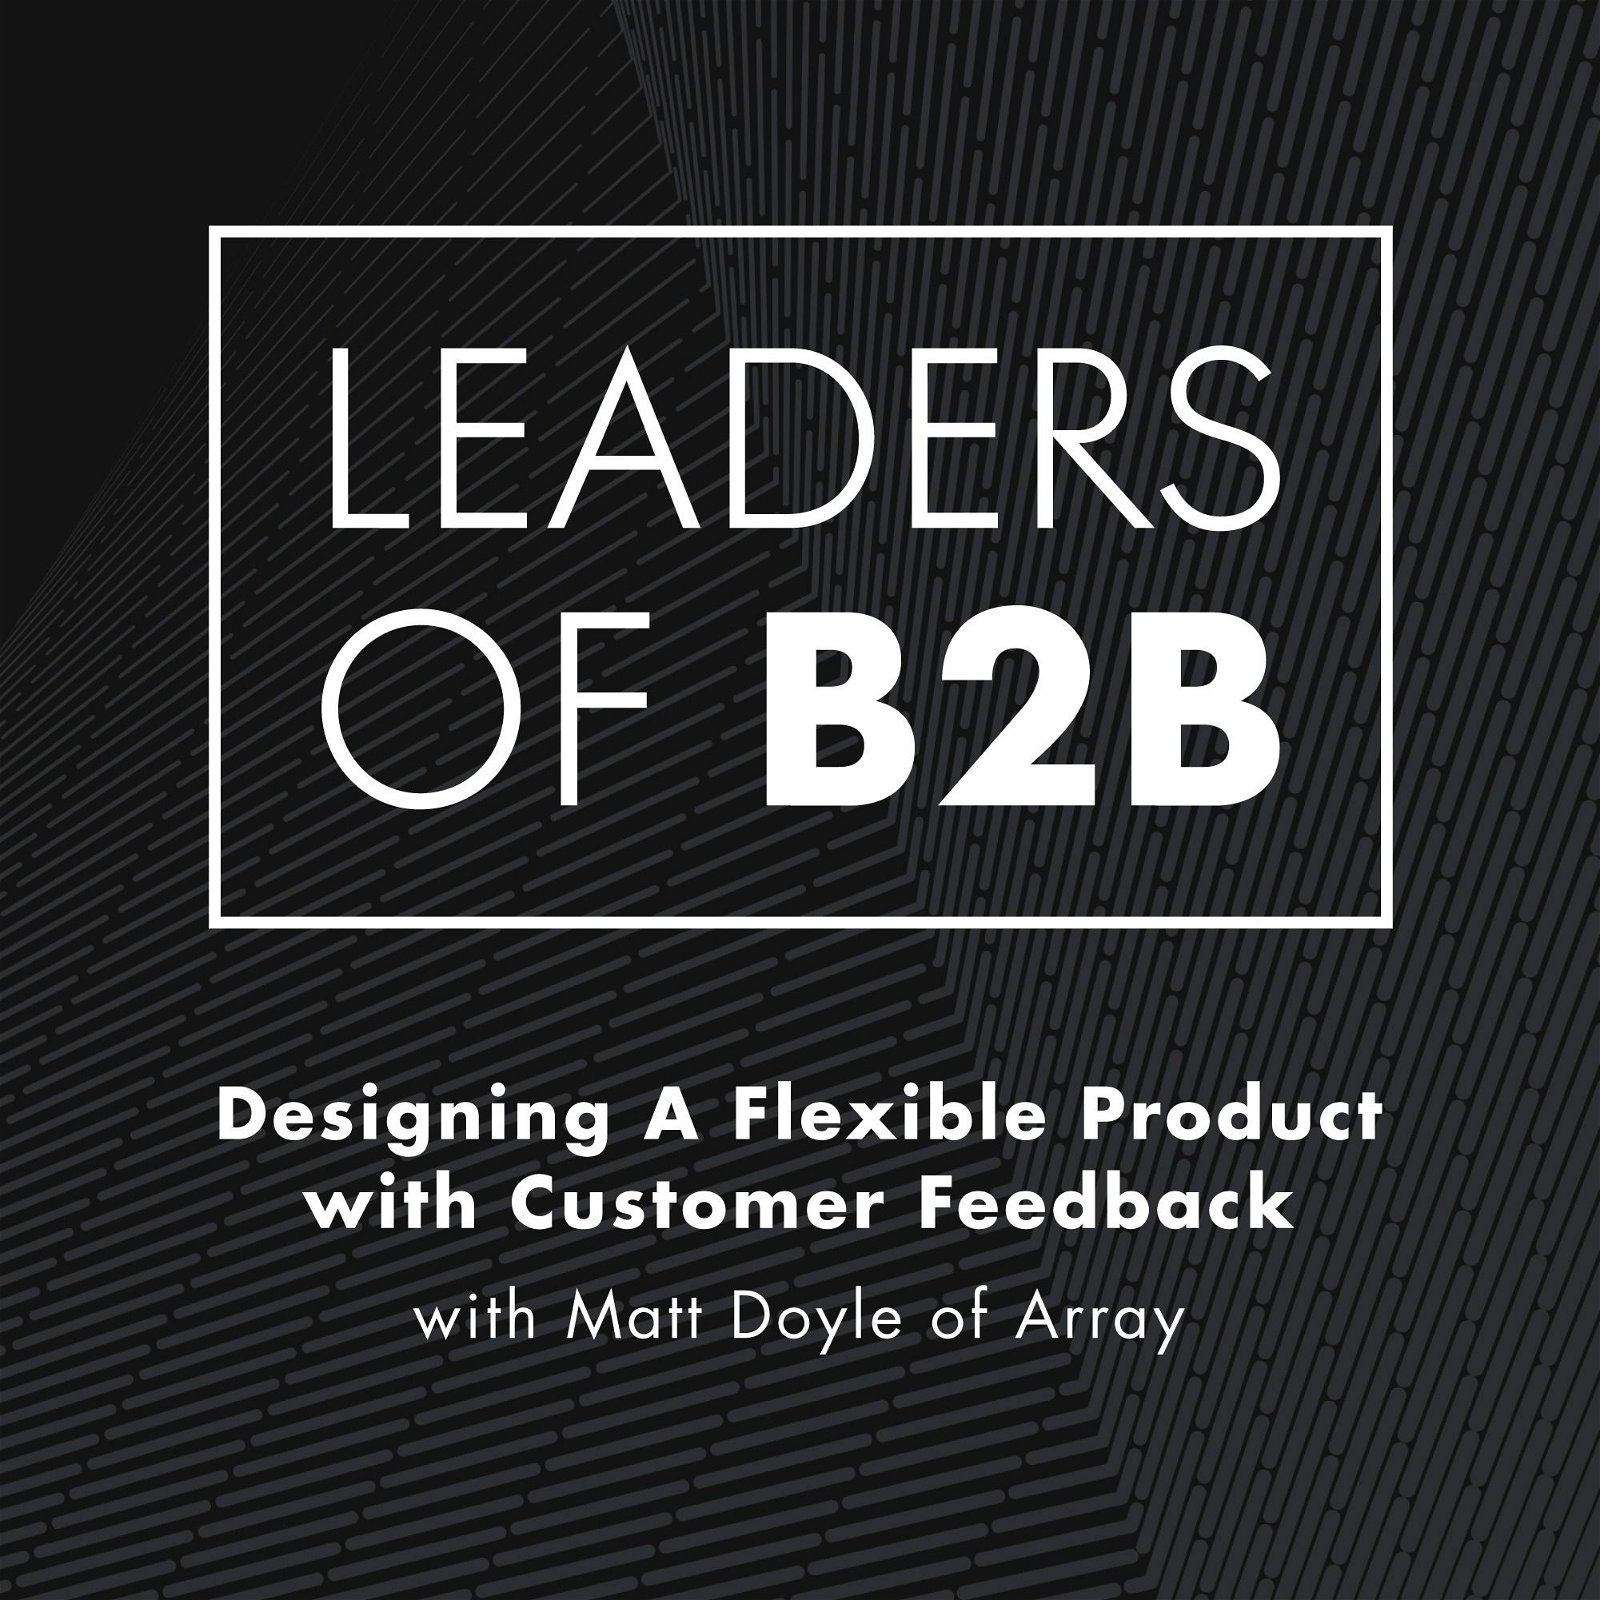 Designing a Flexible Product with Customer Feedback with Matt Doyle of Array